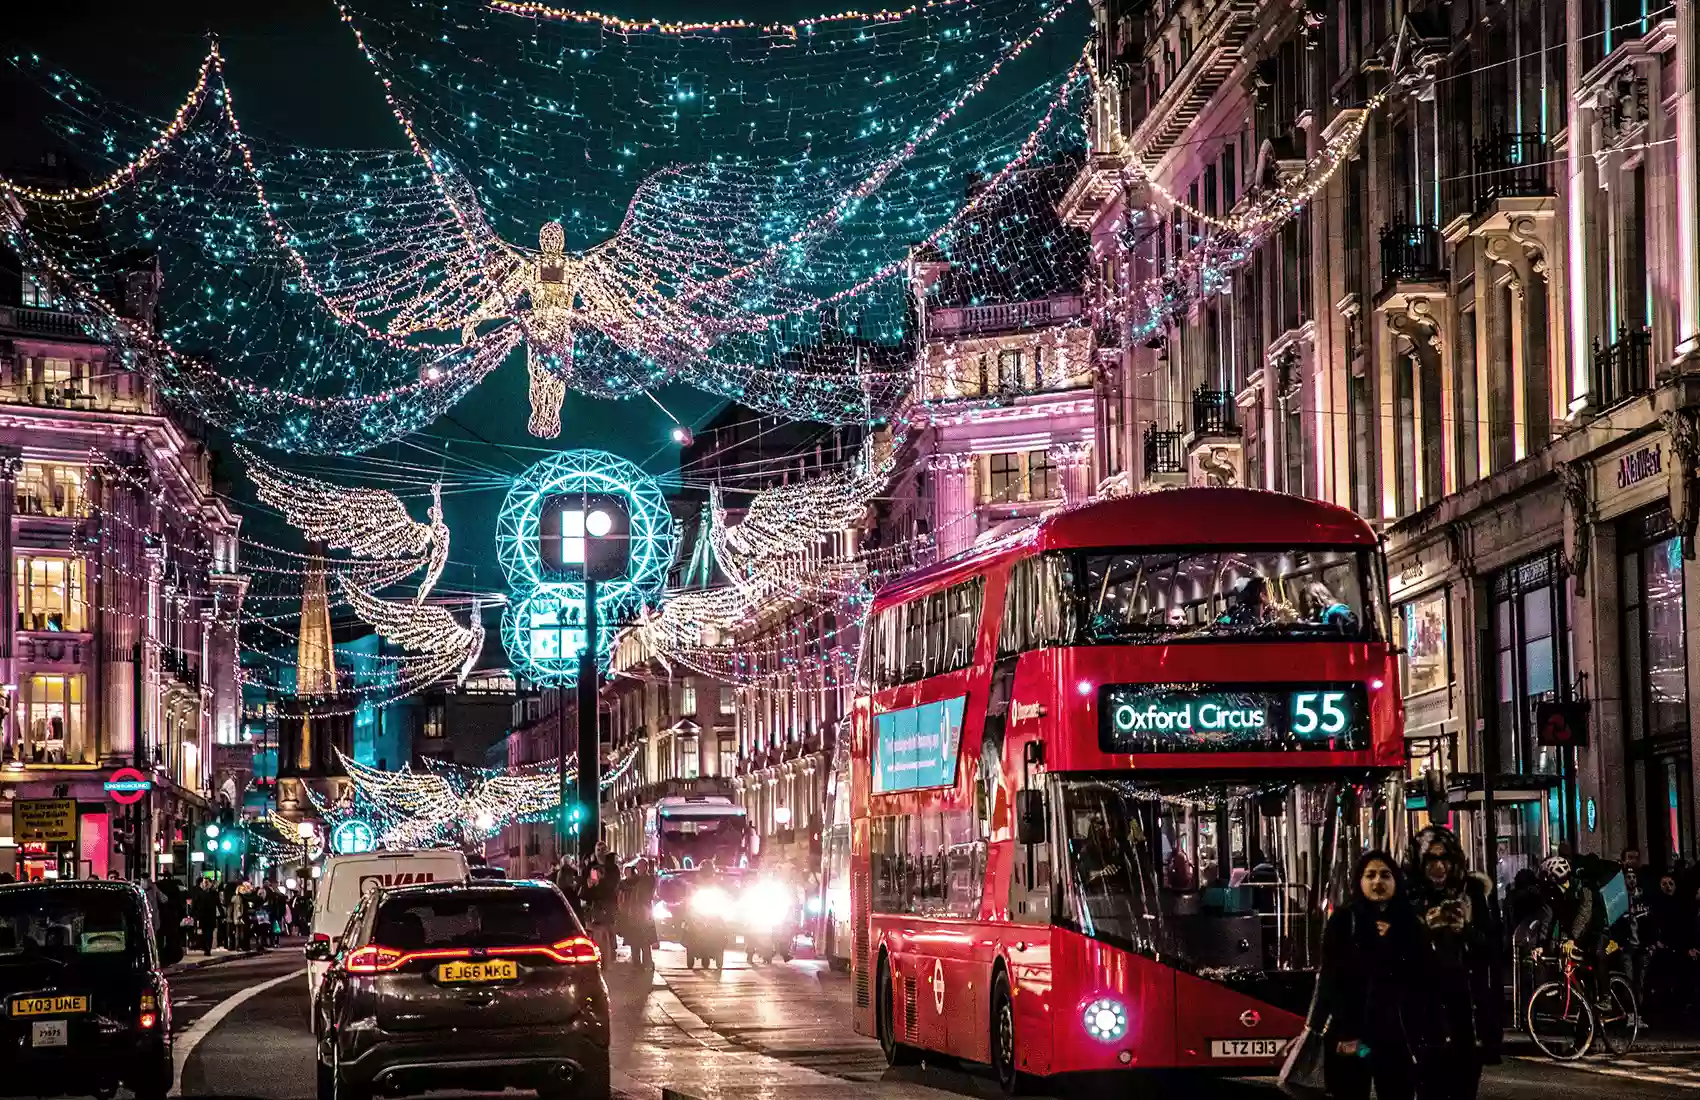 Prepare for your getaway trip to London in December with our helpful guide Discover all the travel advice from travel tips to things to do.